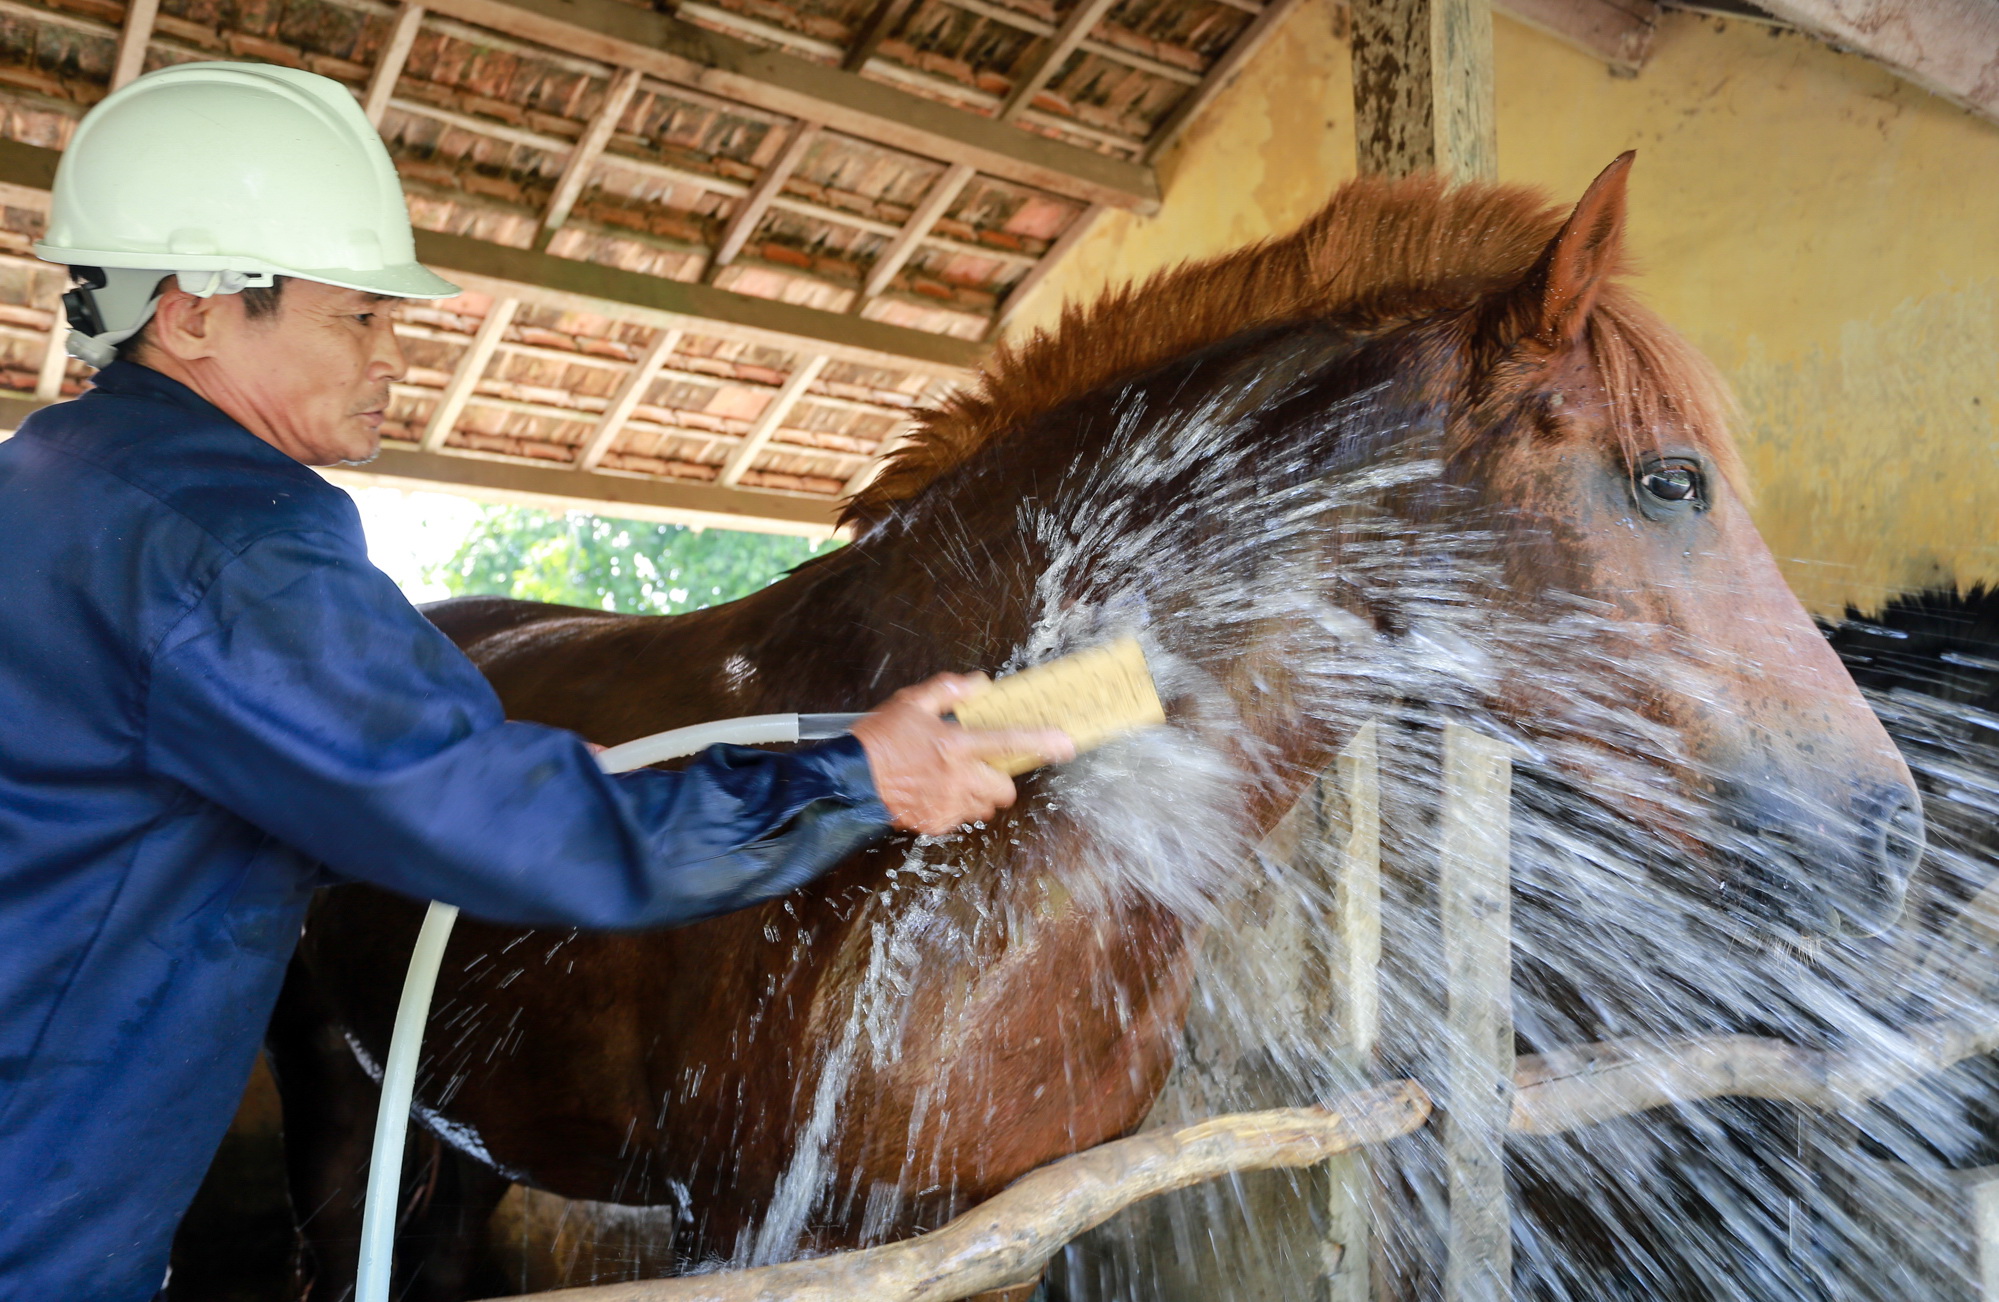 Producing serum from horse blood in central Vietnam